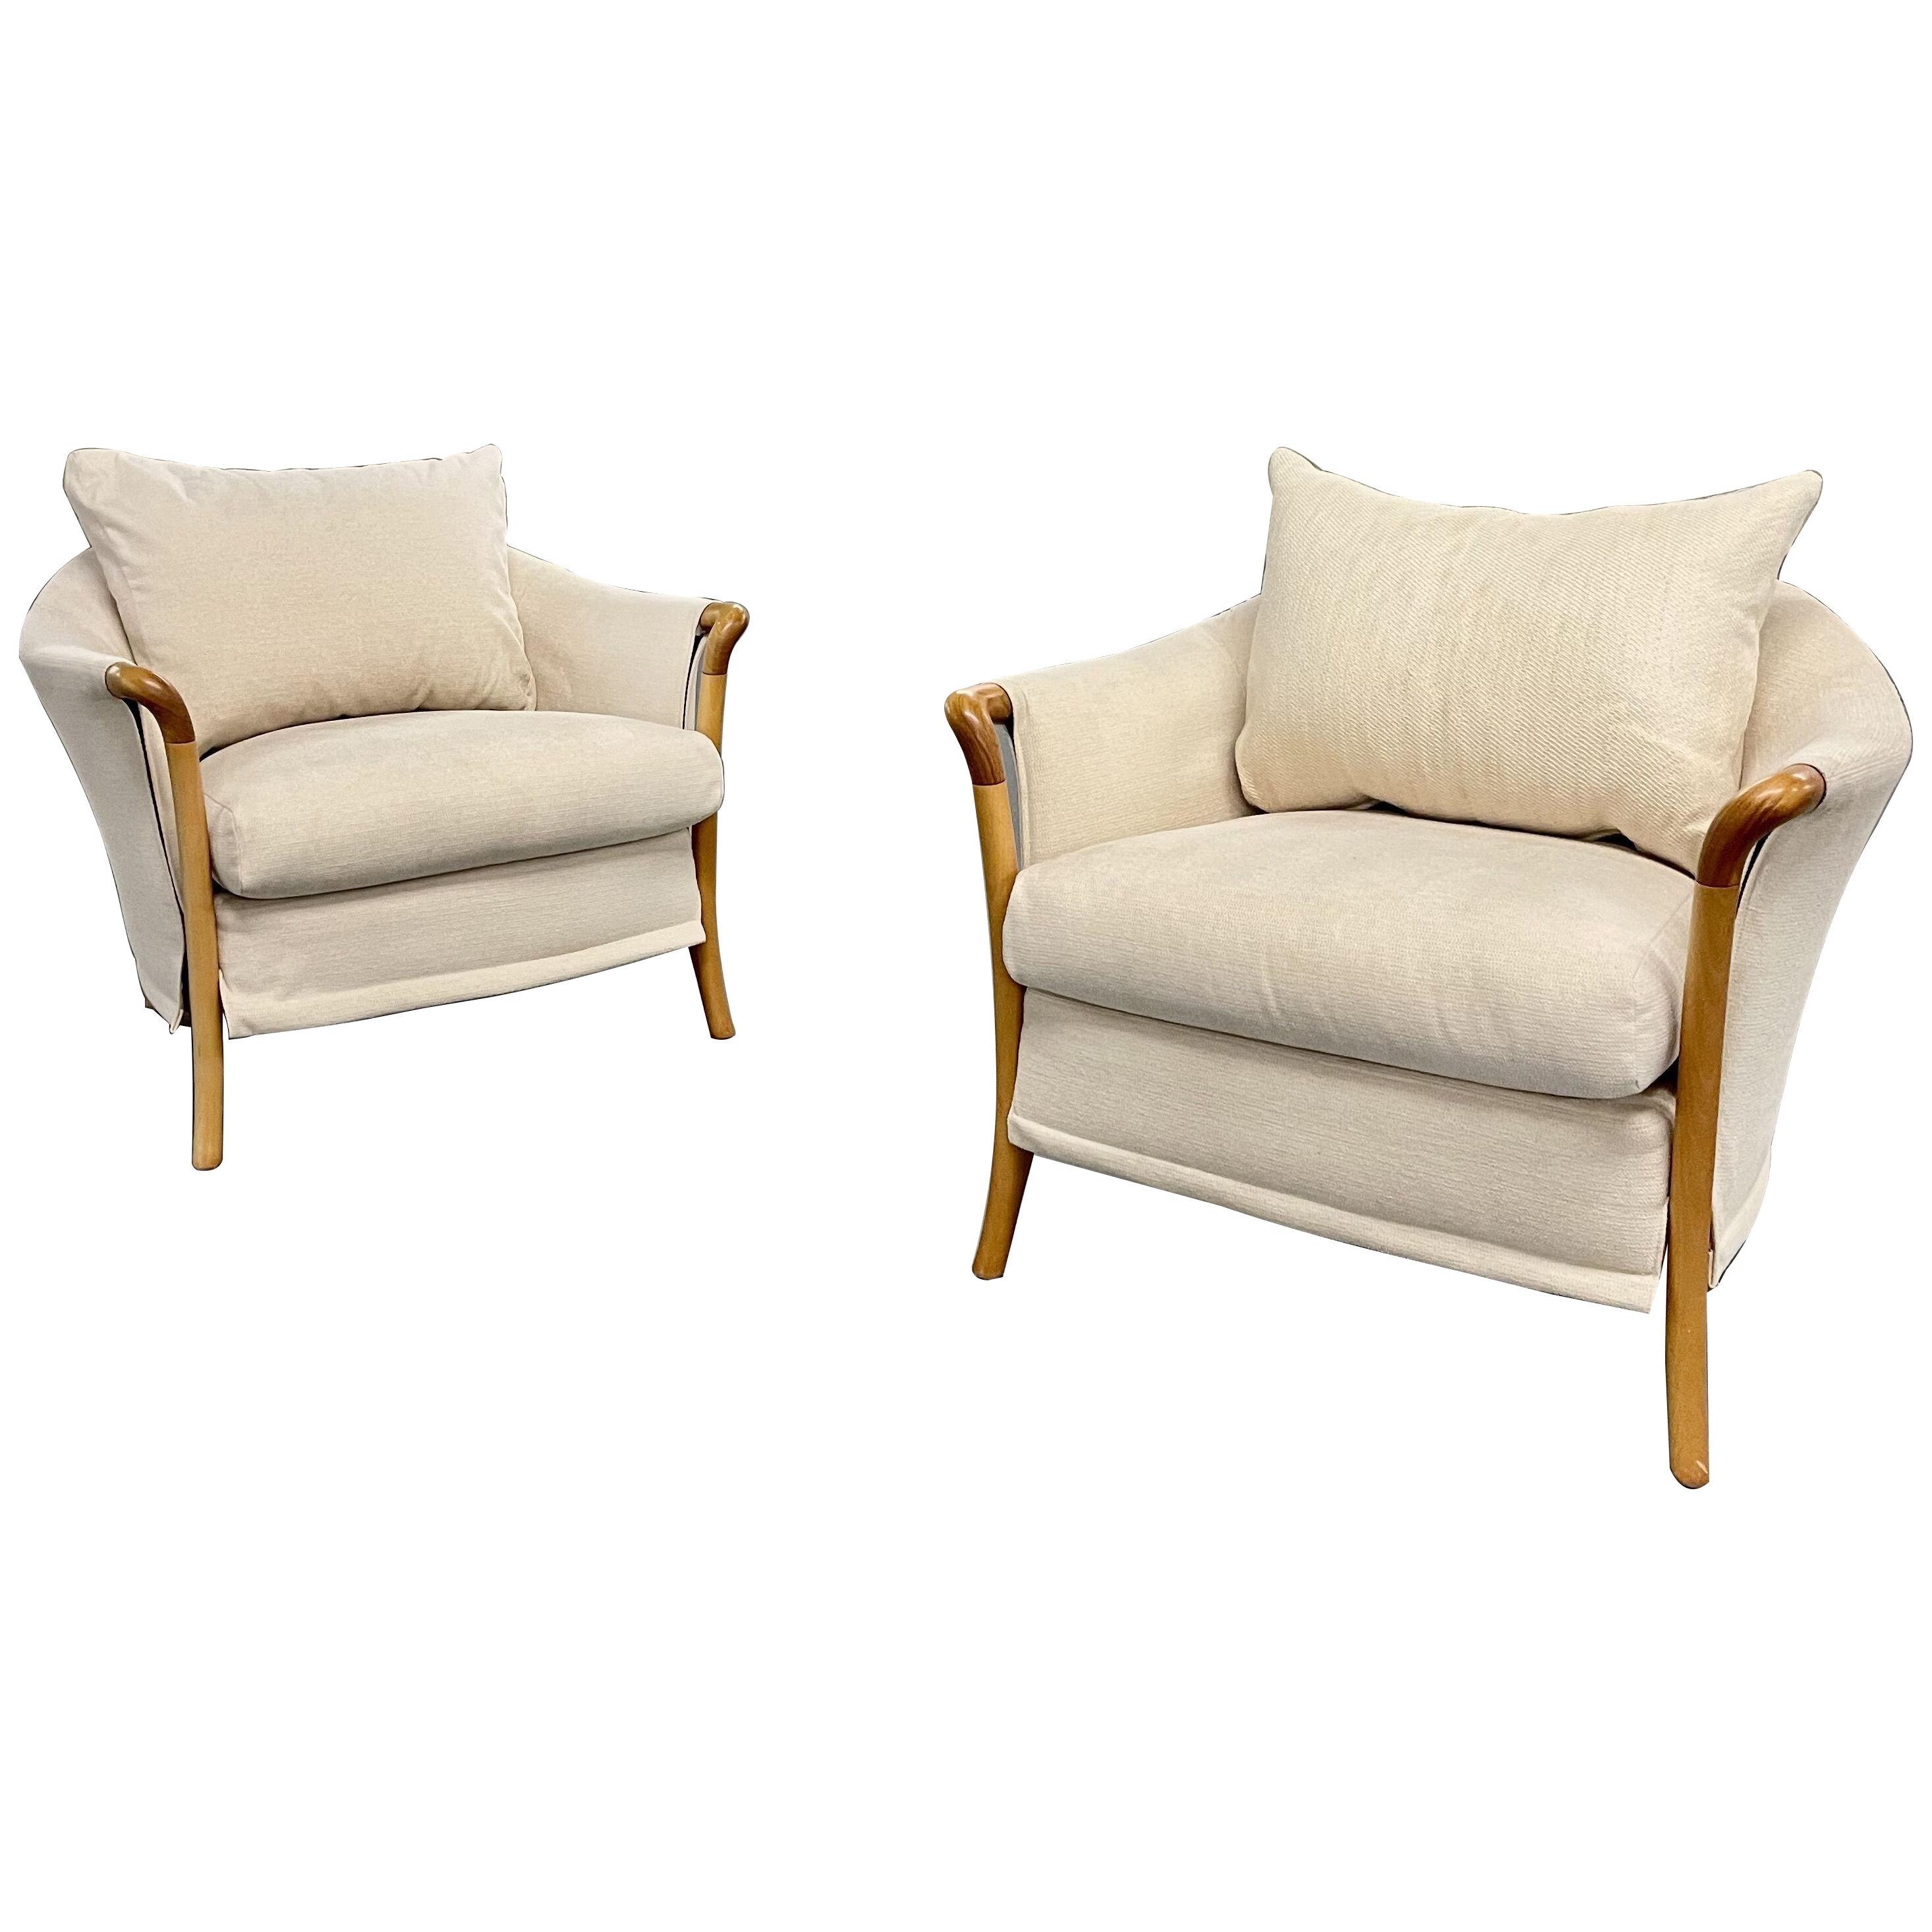 Pair of Umberto Asnago for Giorgetti Lounge Chairs, Arm Chairs, Bergeres